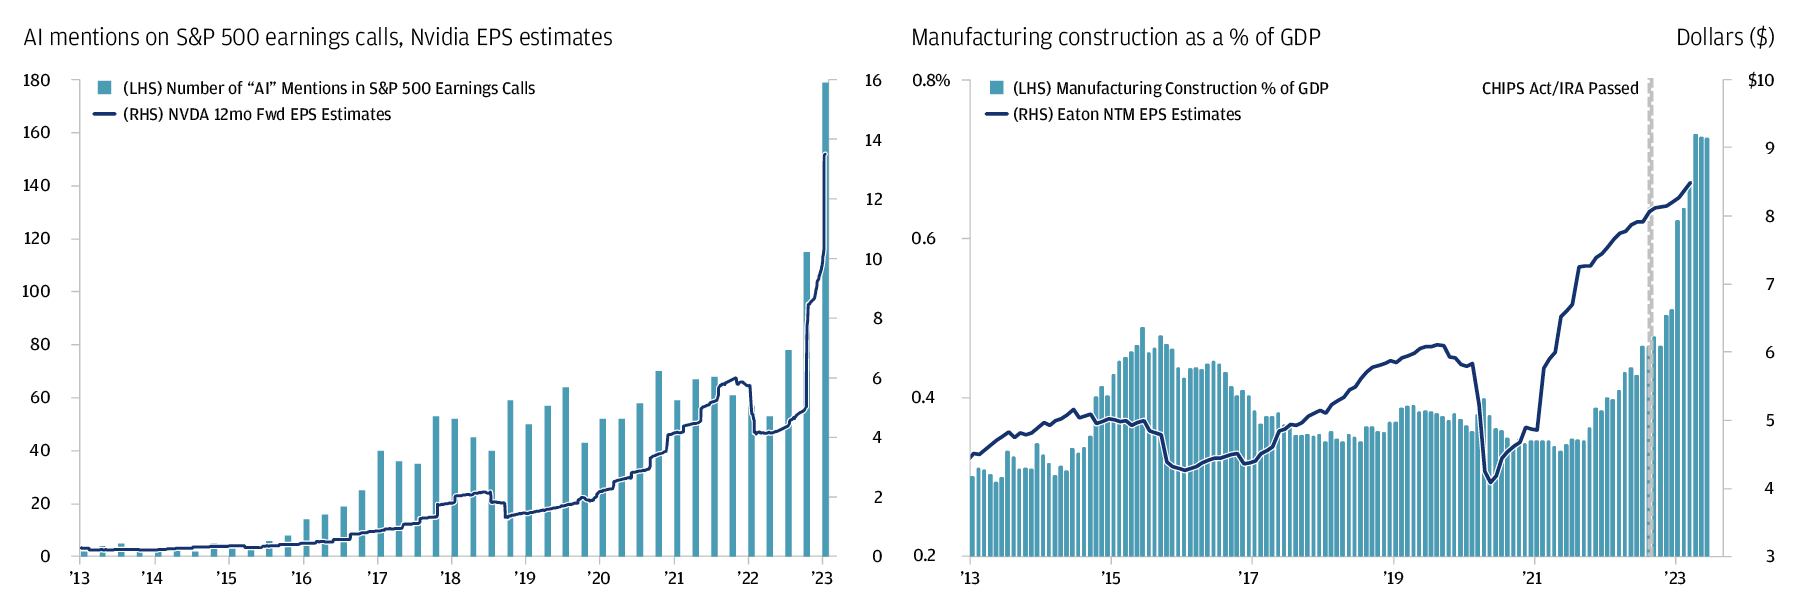  The chart on the left shows the number of mentions of the word "AI" in S&P 500 earnings calls, alongside NVDA's 12-month forward EPS estimates from Q1 2013 to Q2 2023. The chart on the right shows Manufacturing Construction as a percentage of GDP, as well as Eaton's forward EPS estimates, from 2013 to 2023.